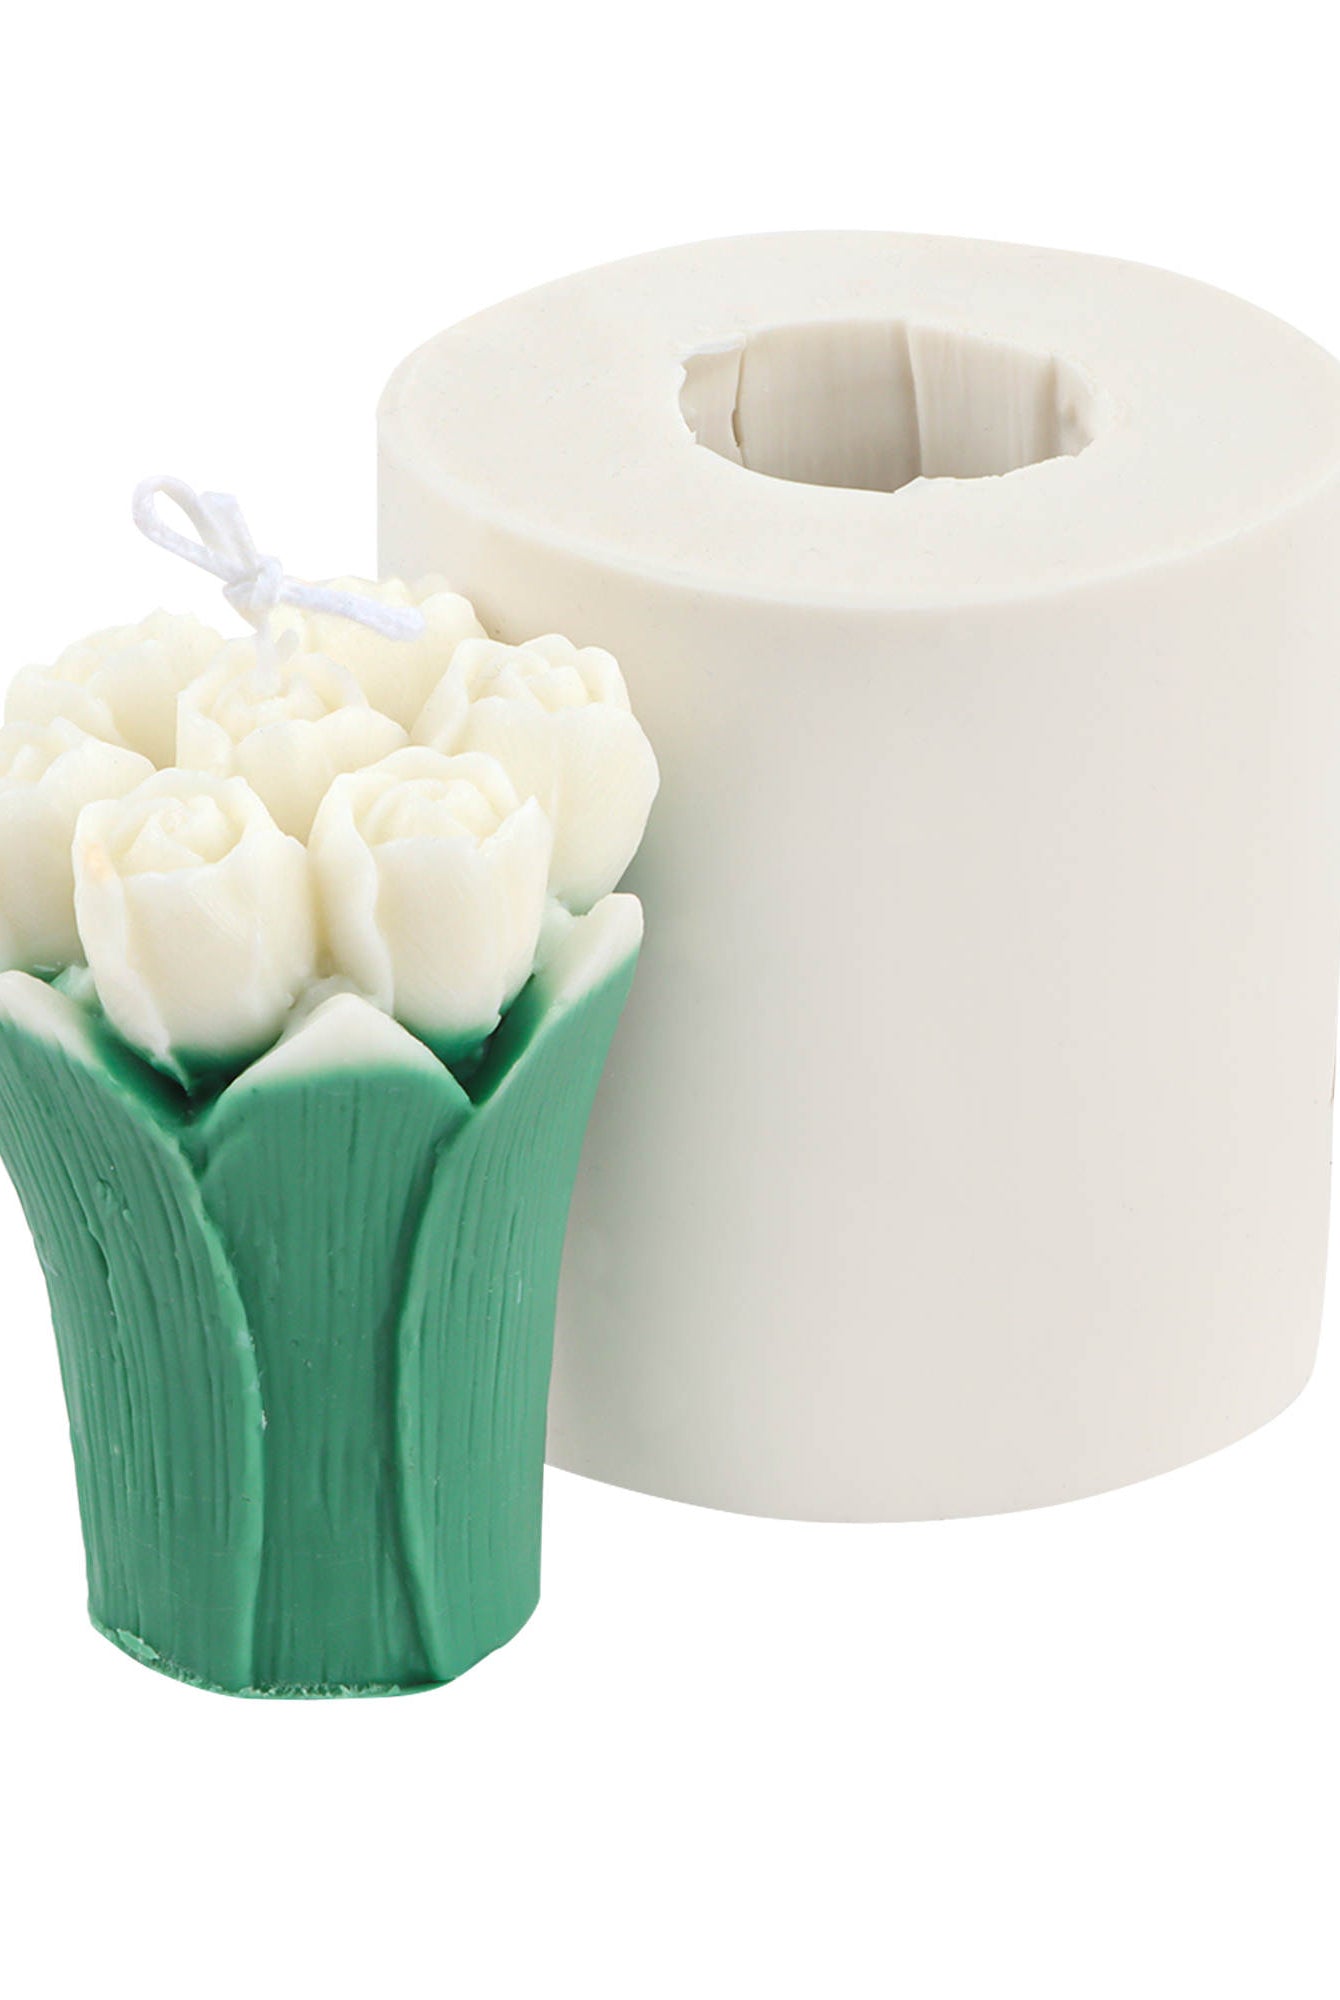 Tulip Bouquet Candle Mould 1 - Silicone Mould, Mold for DIY Candles. Created using candle making kit with cotton candle wicks and candle colour chips. Using soy wax for pillar candles. Sold by Myka Candles Moulds Australia